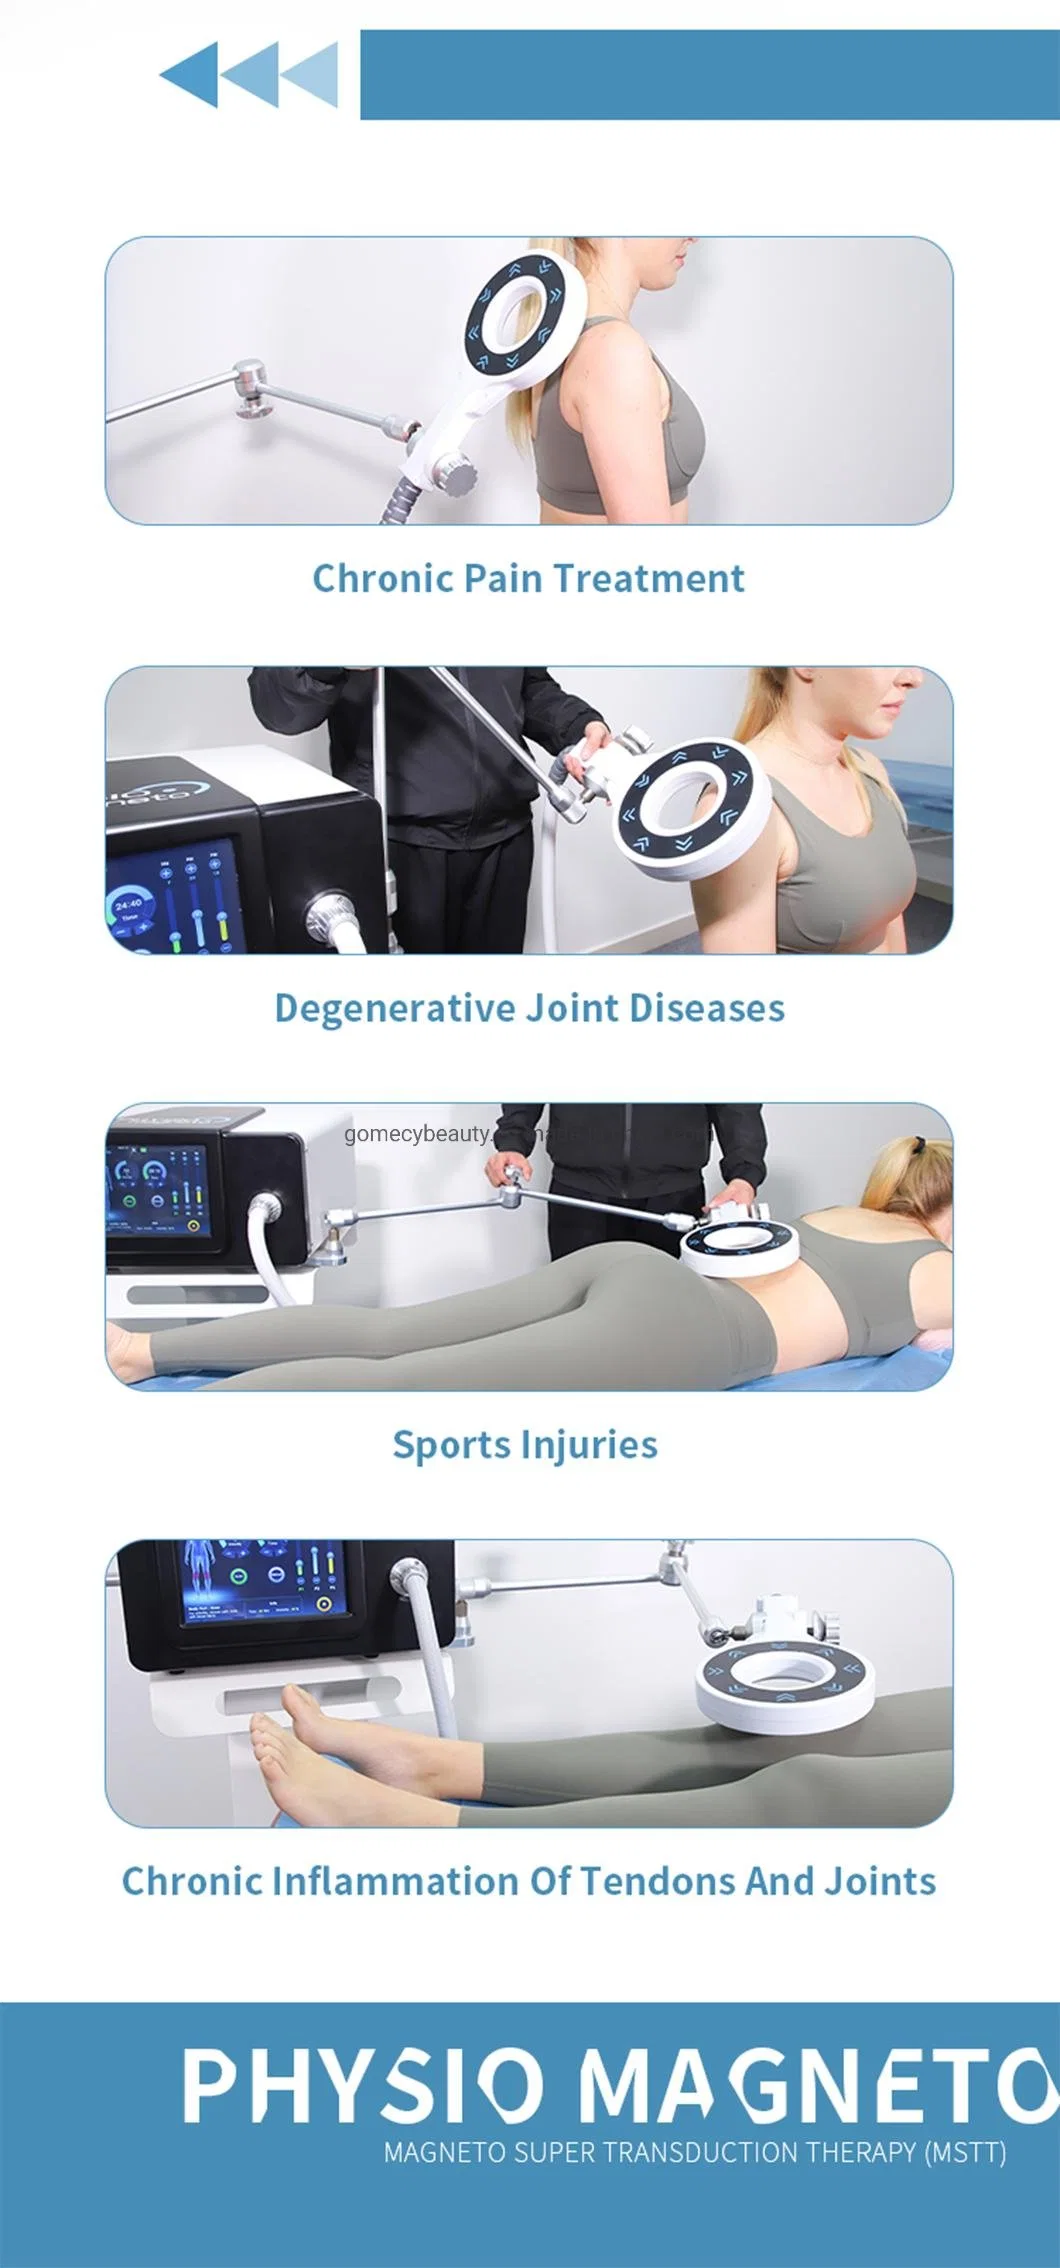 Muscle Stimulator Machine Emtt Herapy Magnetic Pain Release Plus Laser Magneto Therapy Shock Wave Magnetotherapy Equipment